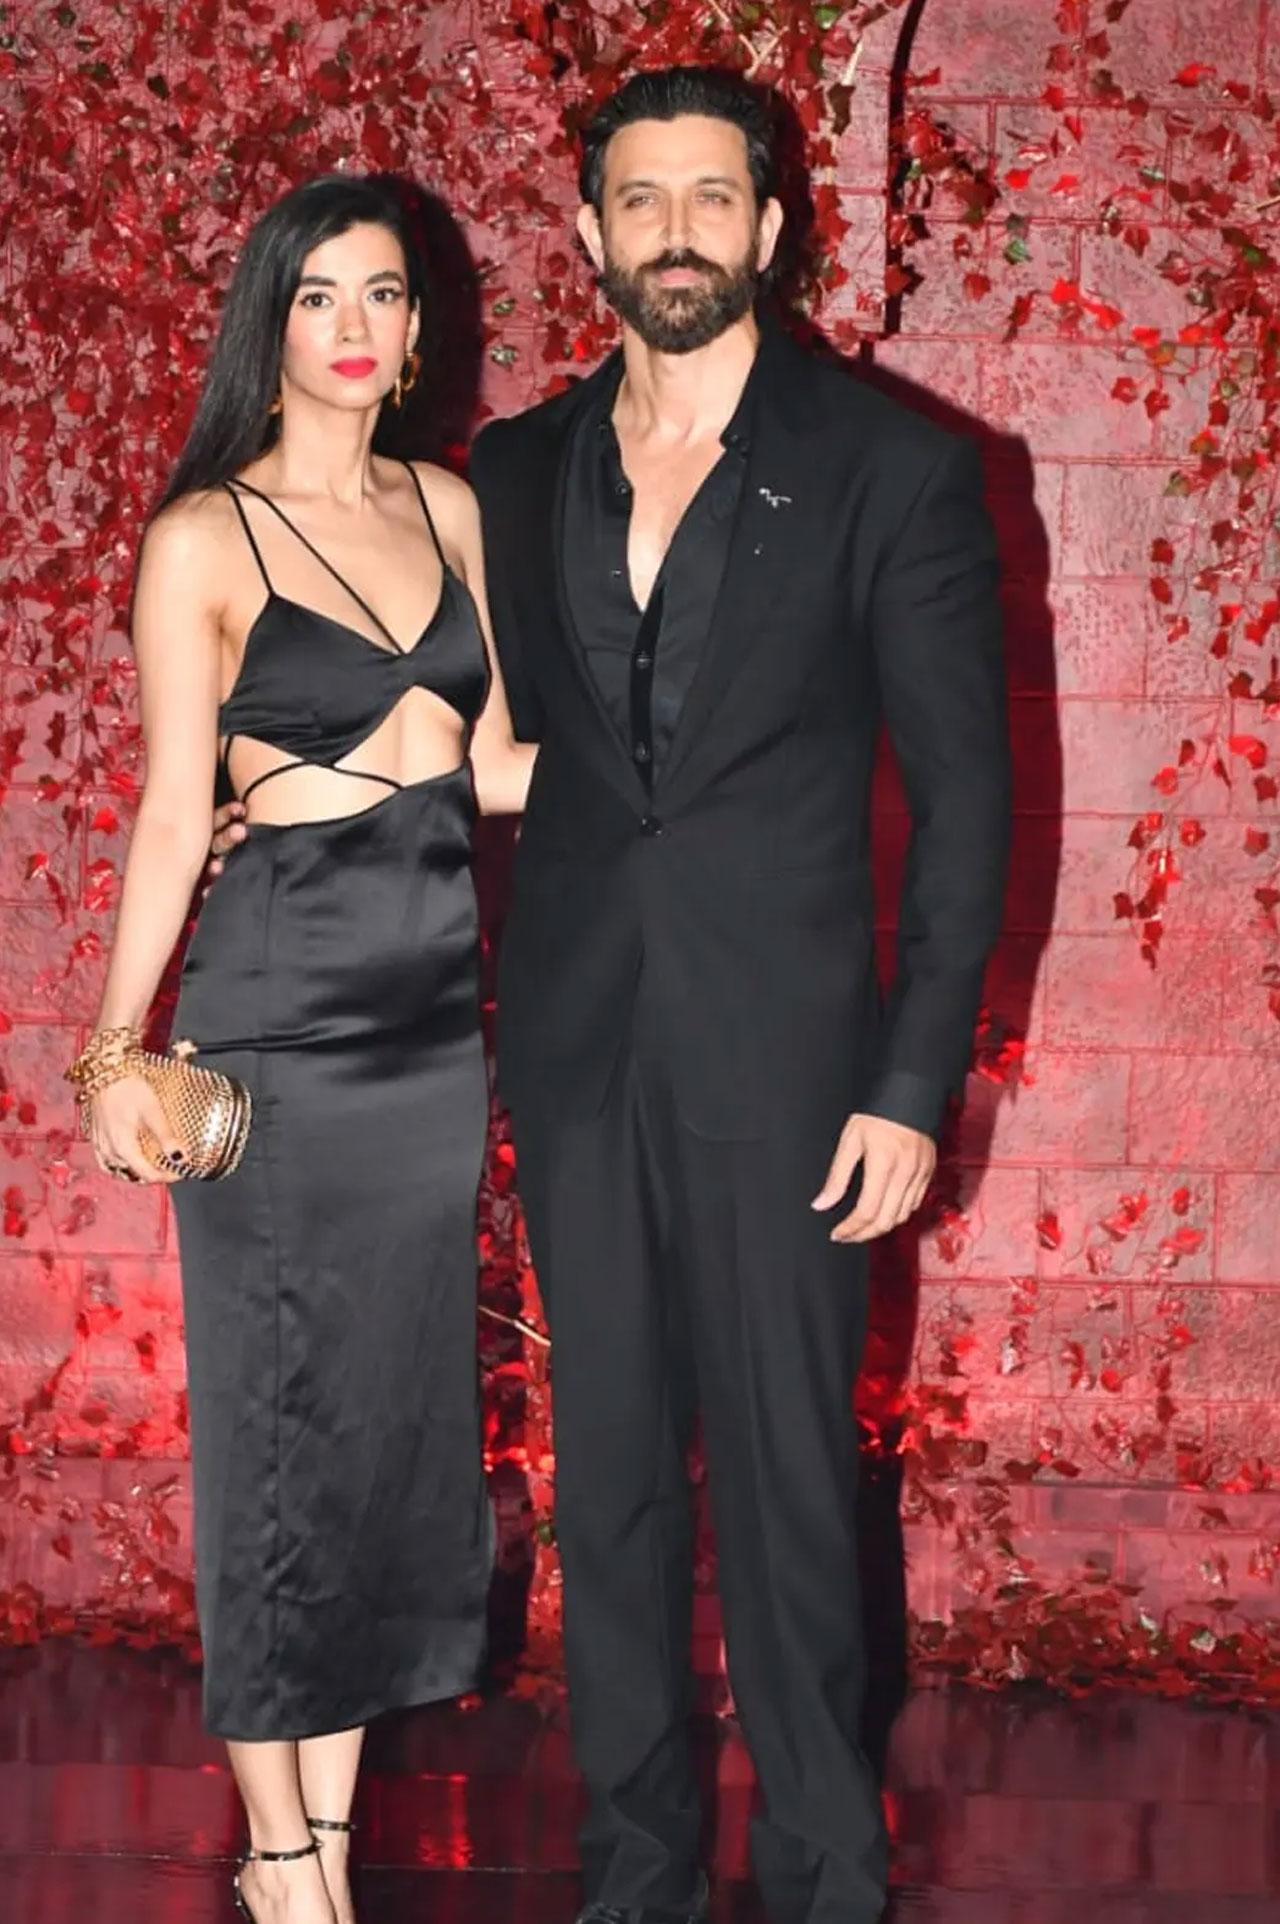 Actor Hrithik Roshan, undoubtedly, stole the spotlight at Karan Johar's 50th birthday bash. He arrived at the party along with his rumoured girlfriend Saba Azad. They made a dashing entry by walking hand-in-hand. The two also posed for shutterbugs gathered outside the party venue. In one of the viral videos, Hrithik is seen introducing sweetly introducing Saba to guests by telling them her name. Read the full story here
